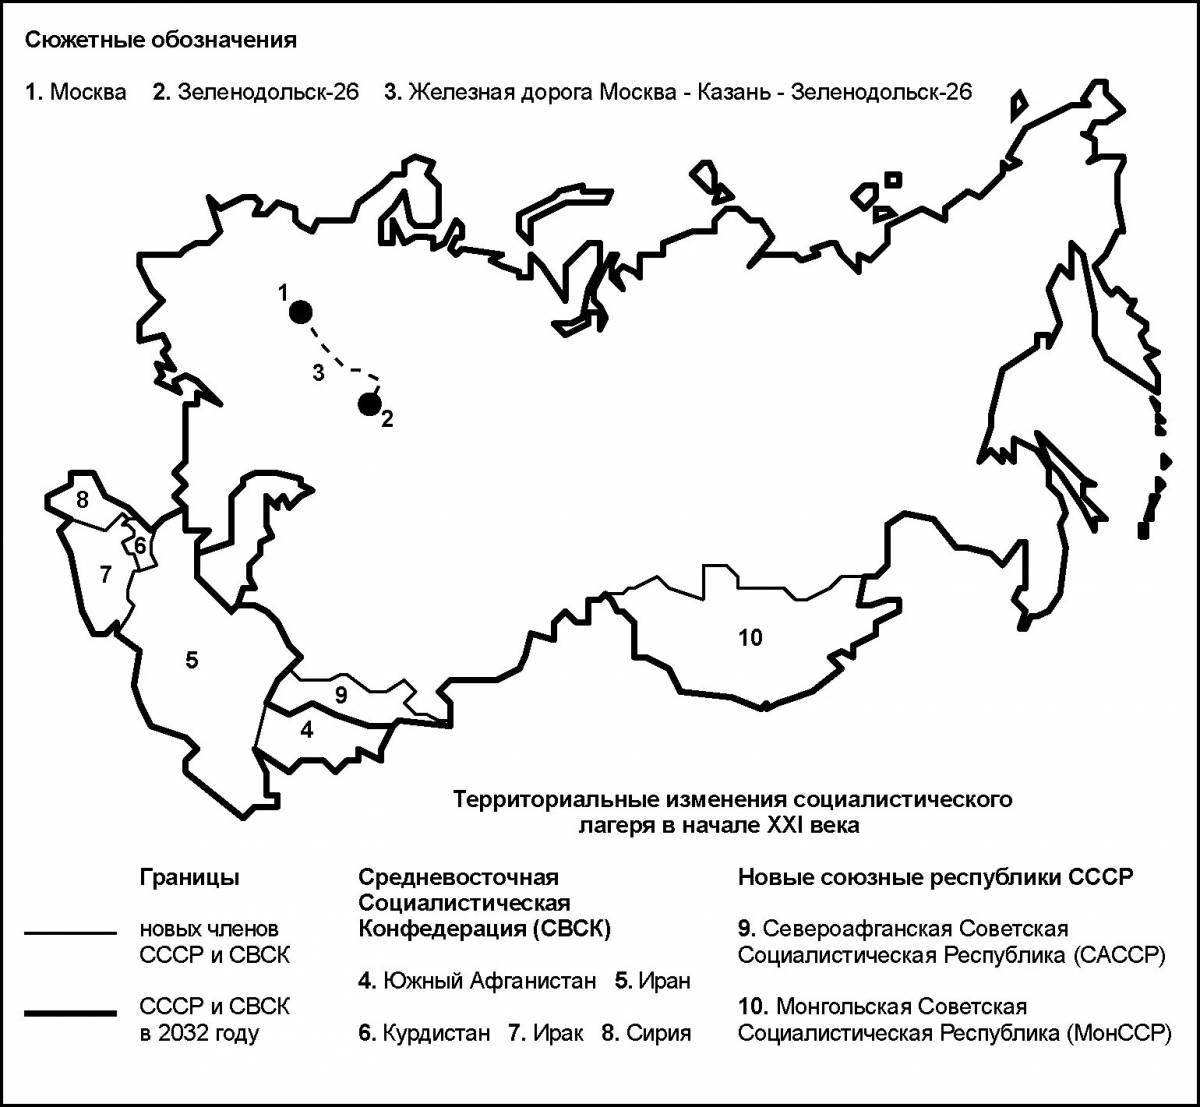 Attractive ussr map coloring book